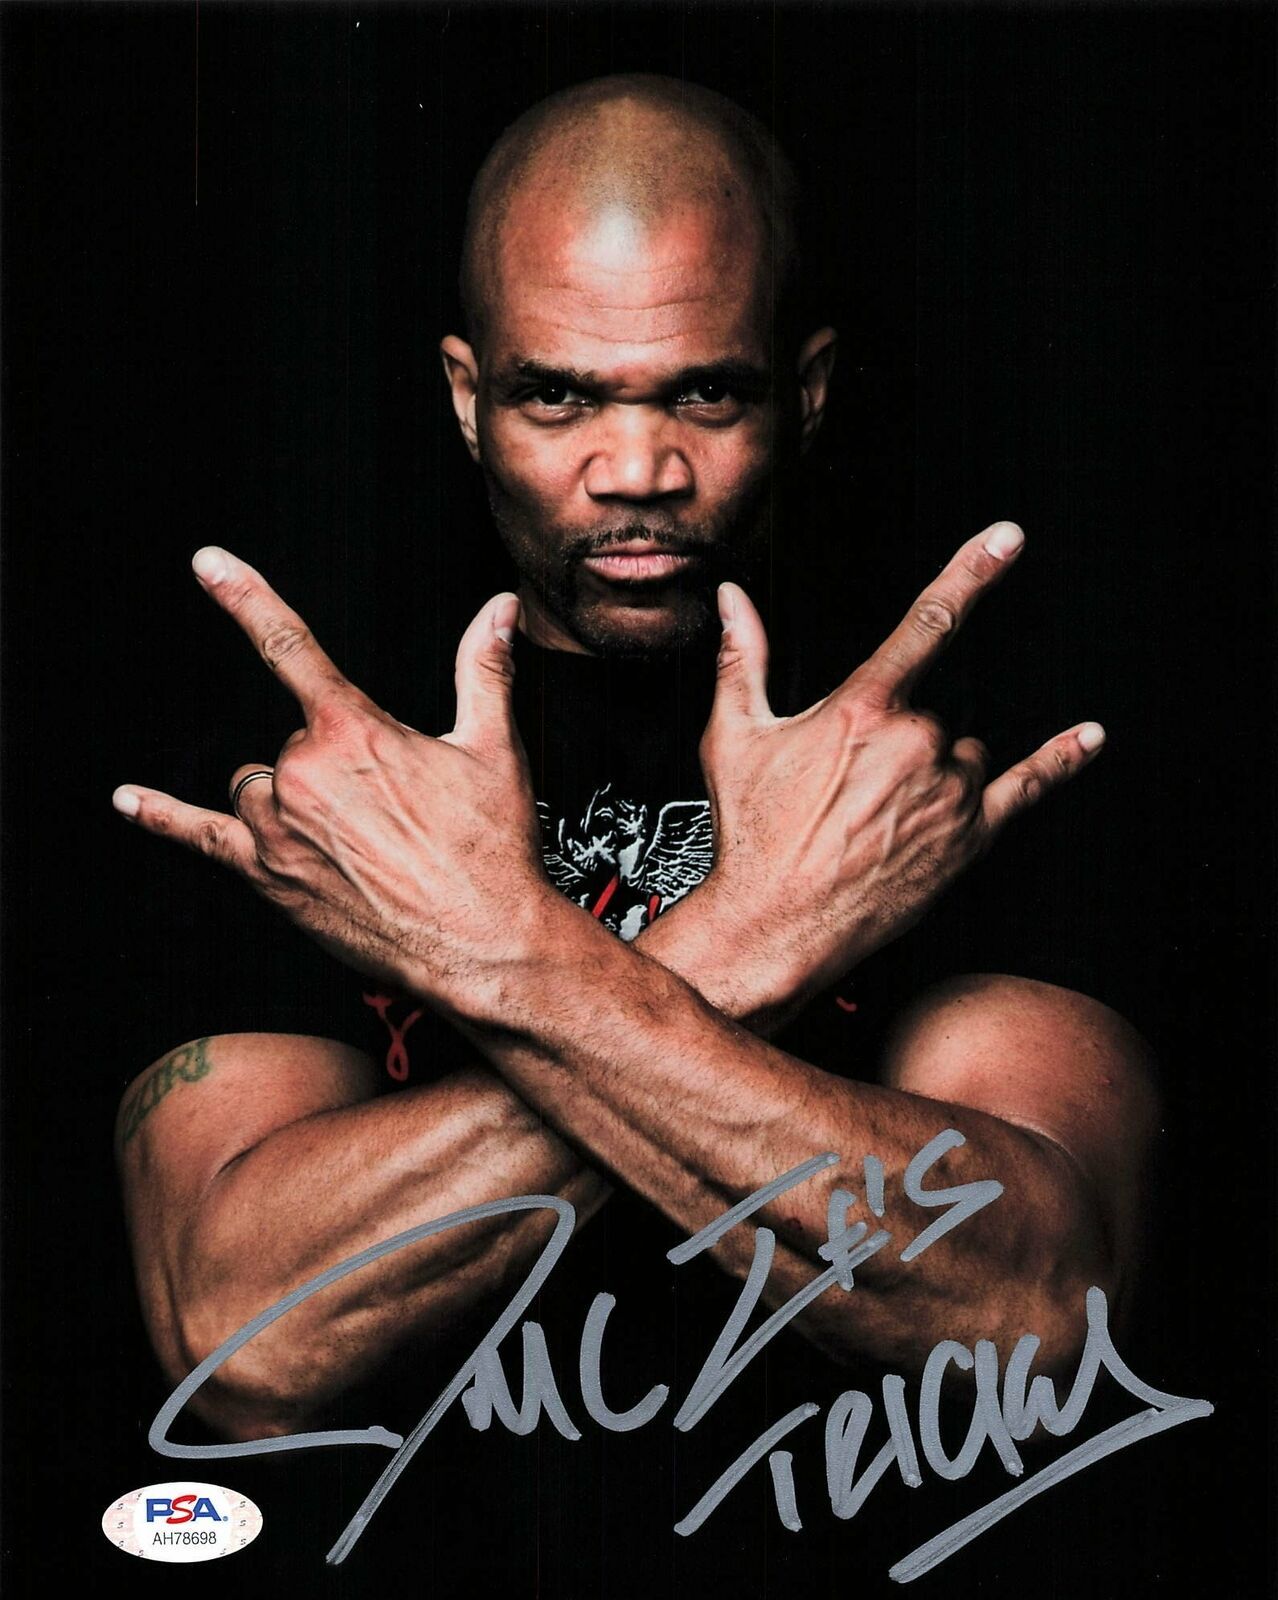 Primary image for Darryl McDaniels signed 8x10 photo PSA/DNA Autographed Run DMC